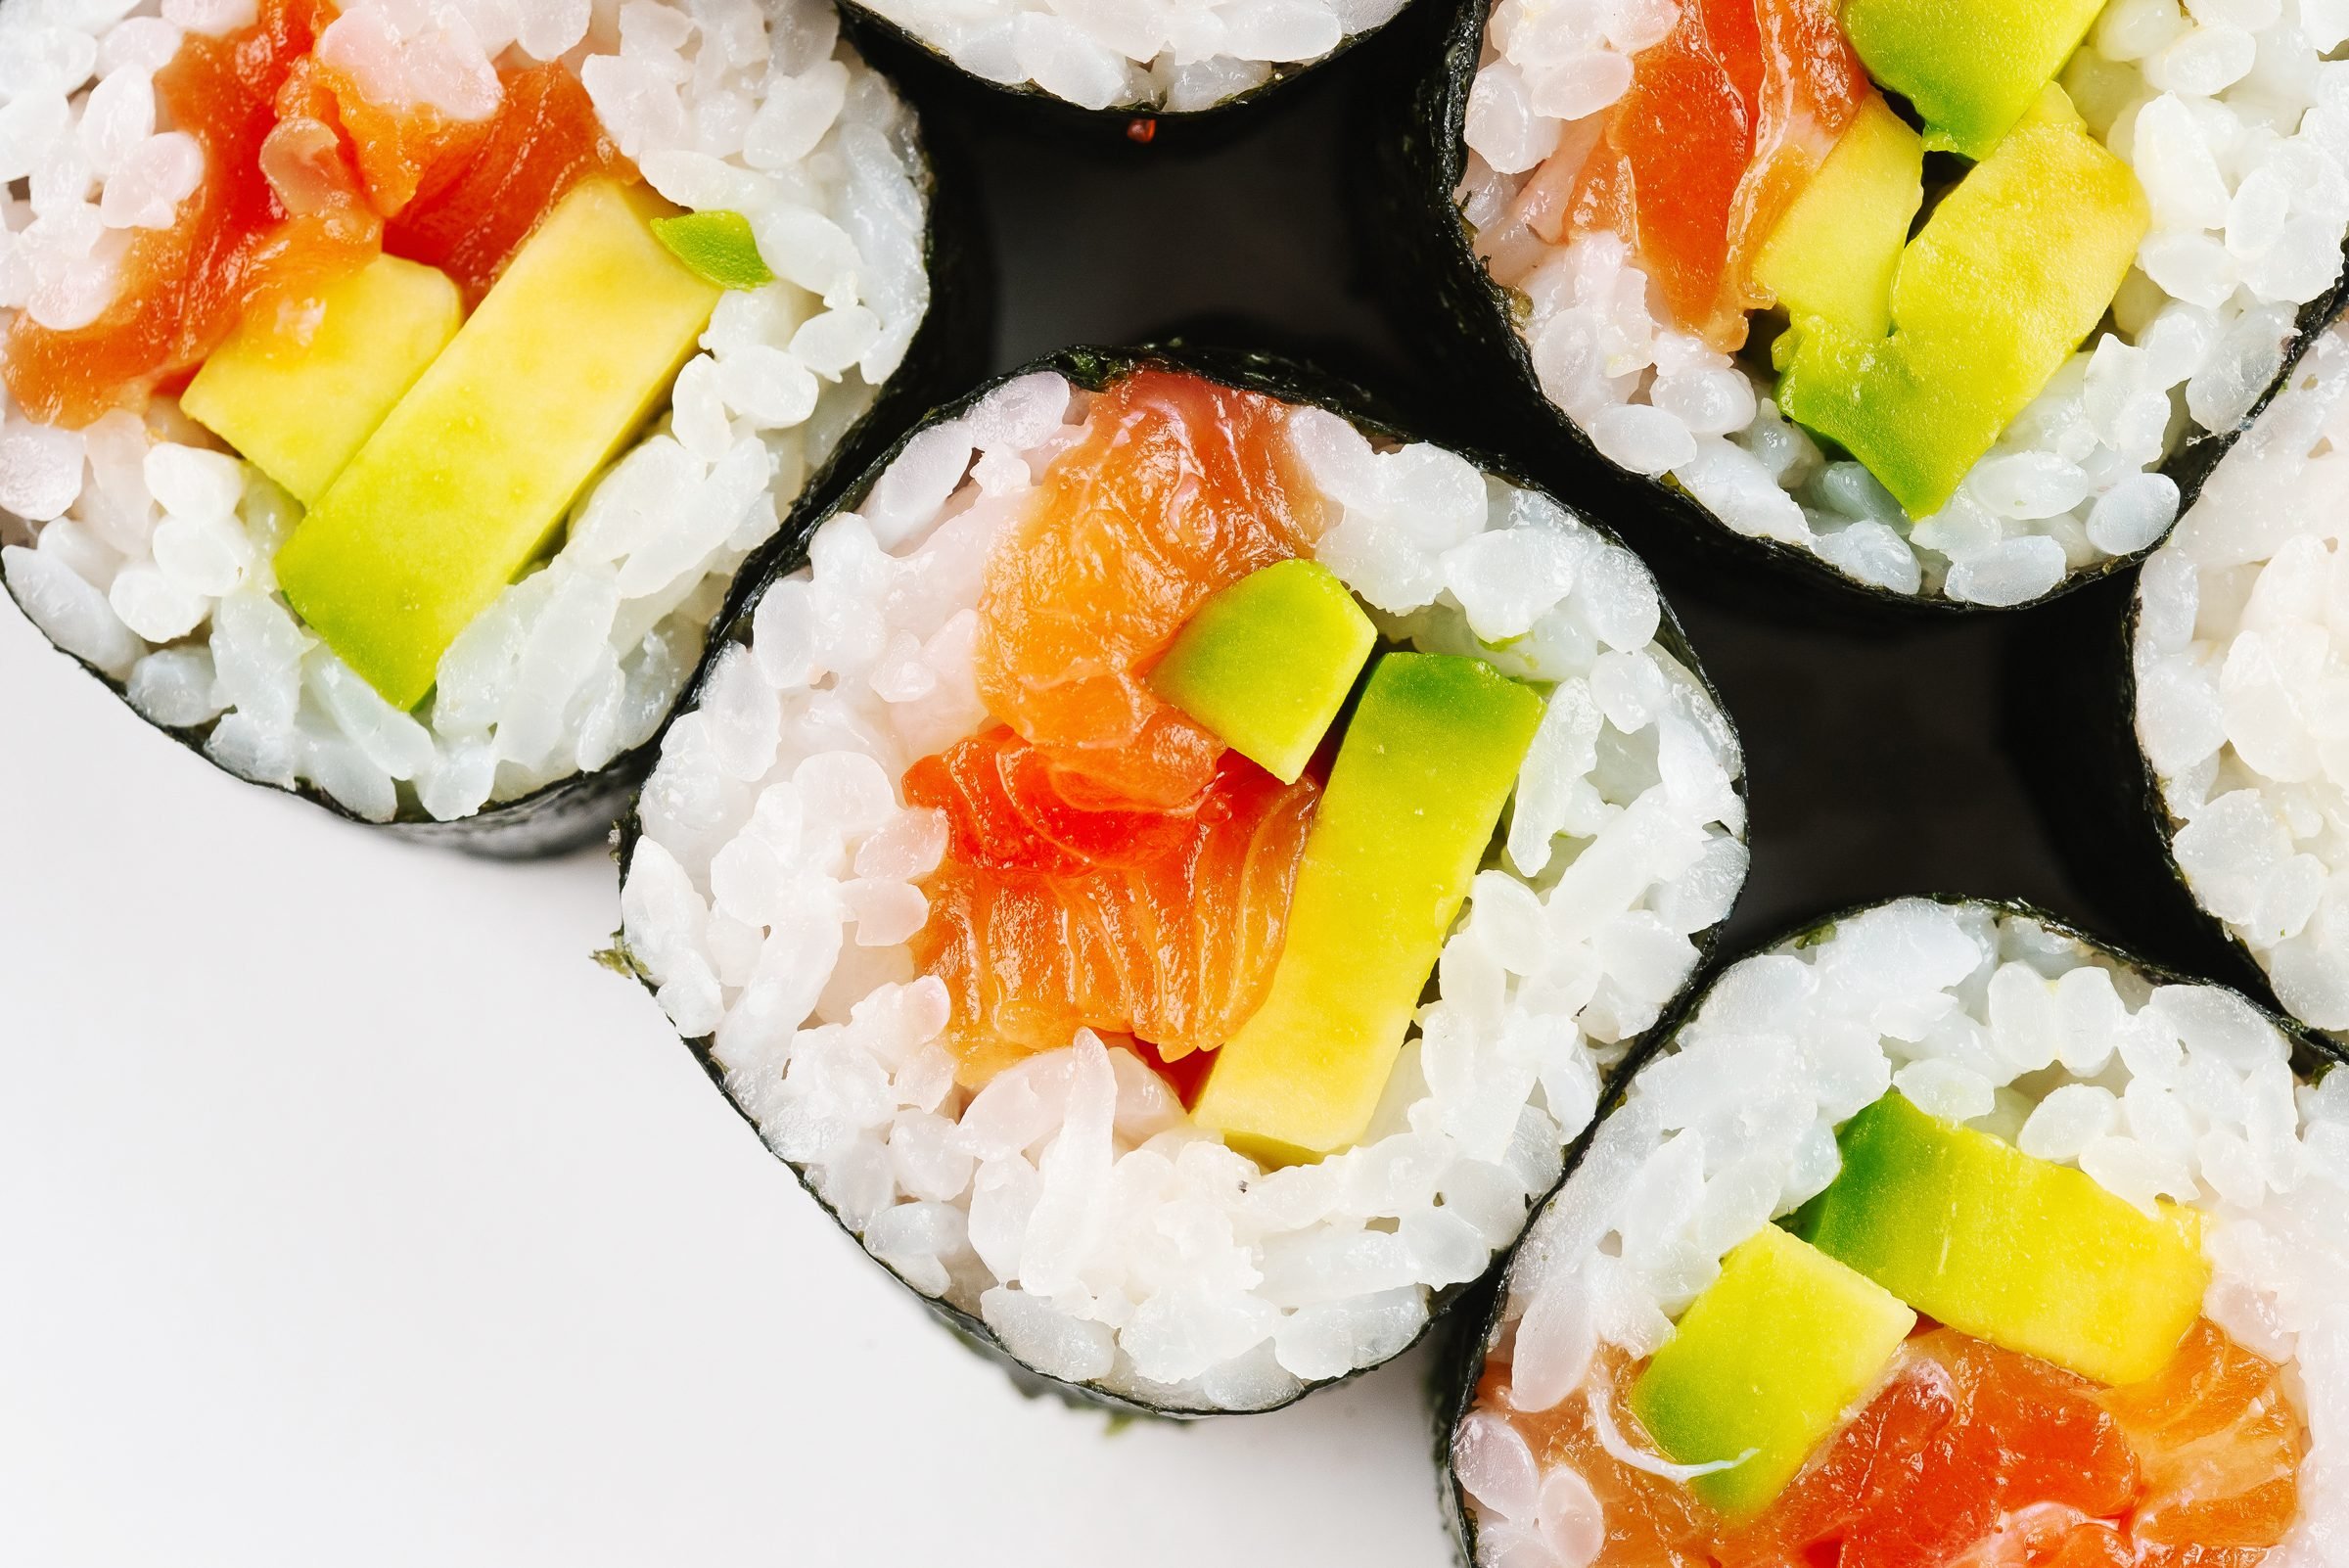 https://www.thehealthy.com/wp-content/uploads/2023/06/What-happens-if-you-eat-sushi-every-day-GettyImages-1174368928.jpg